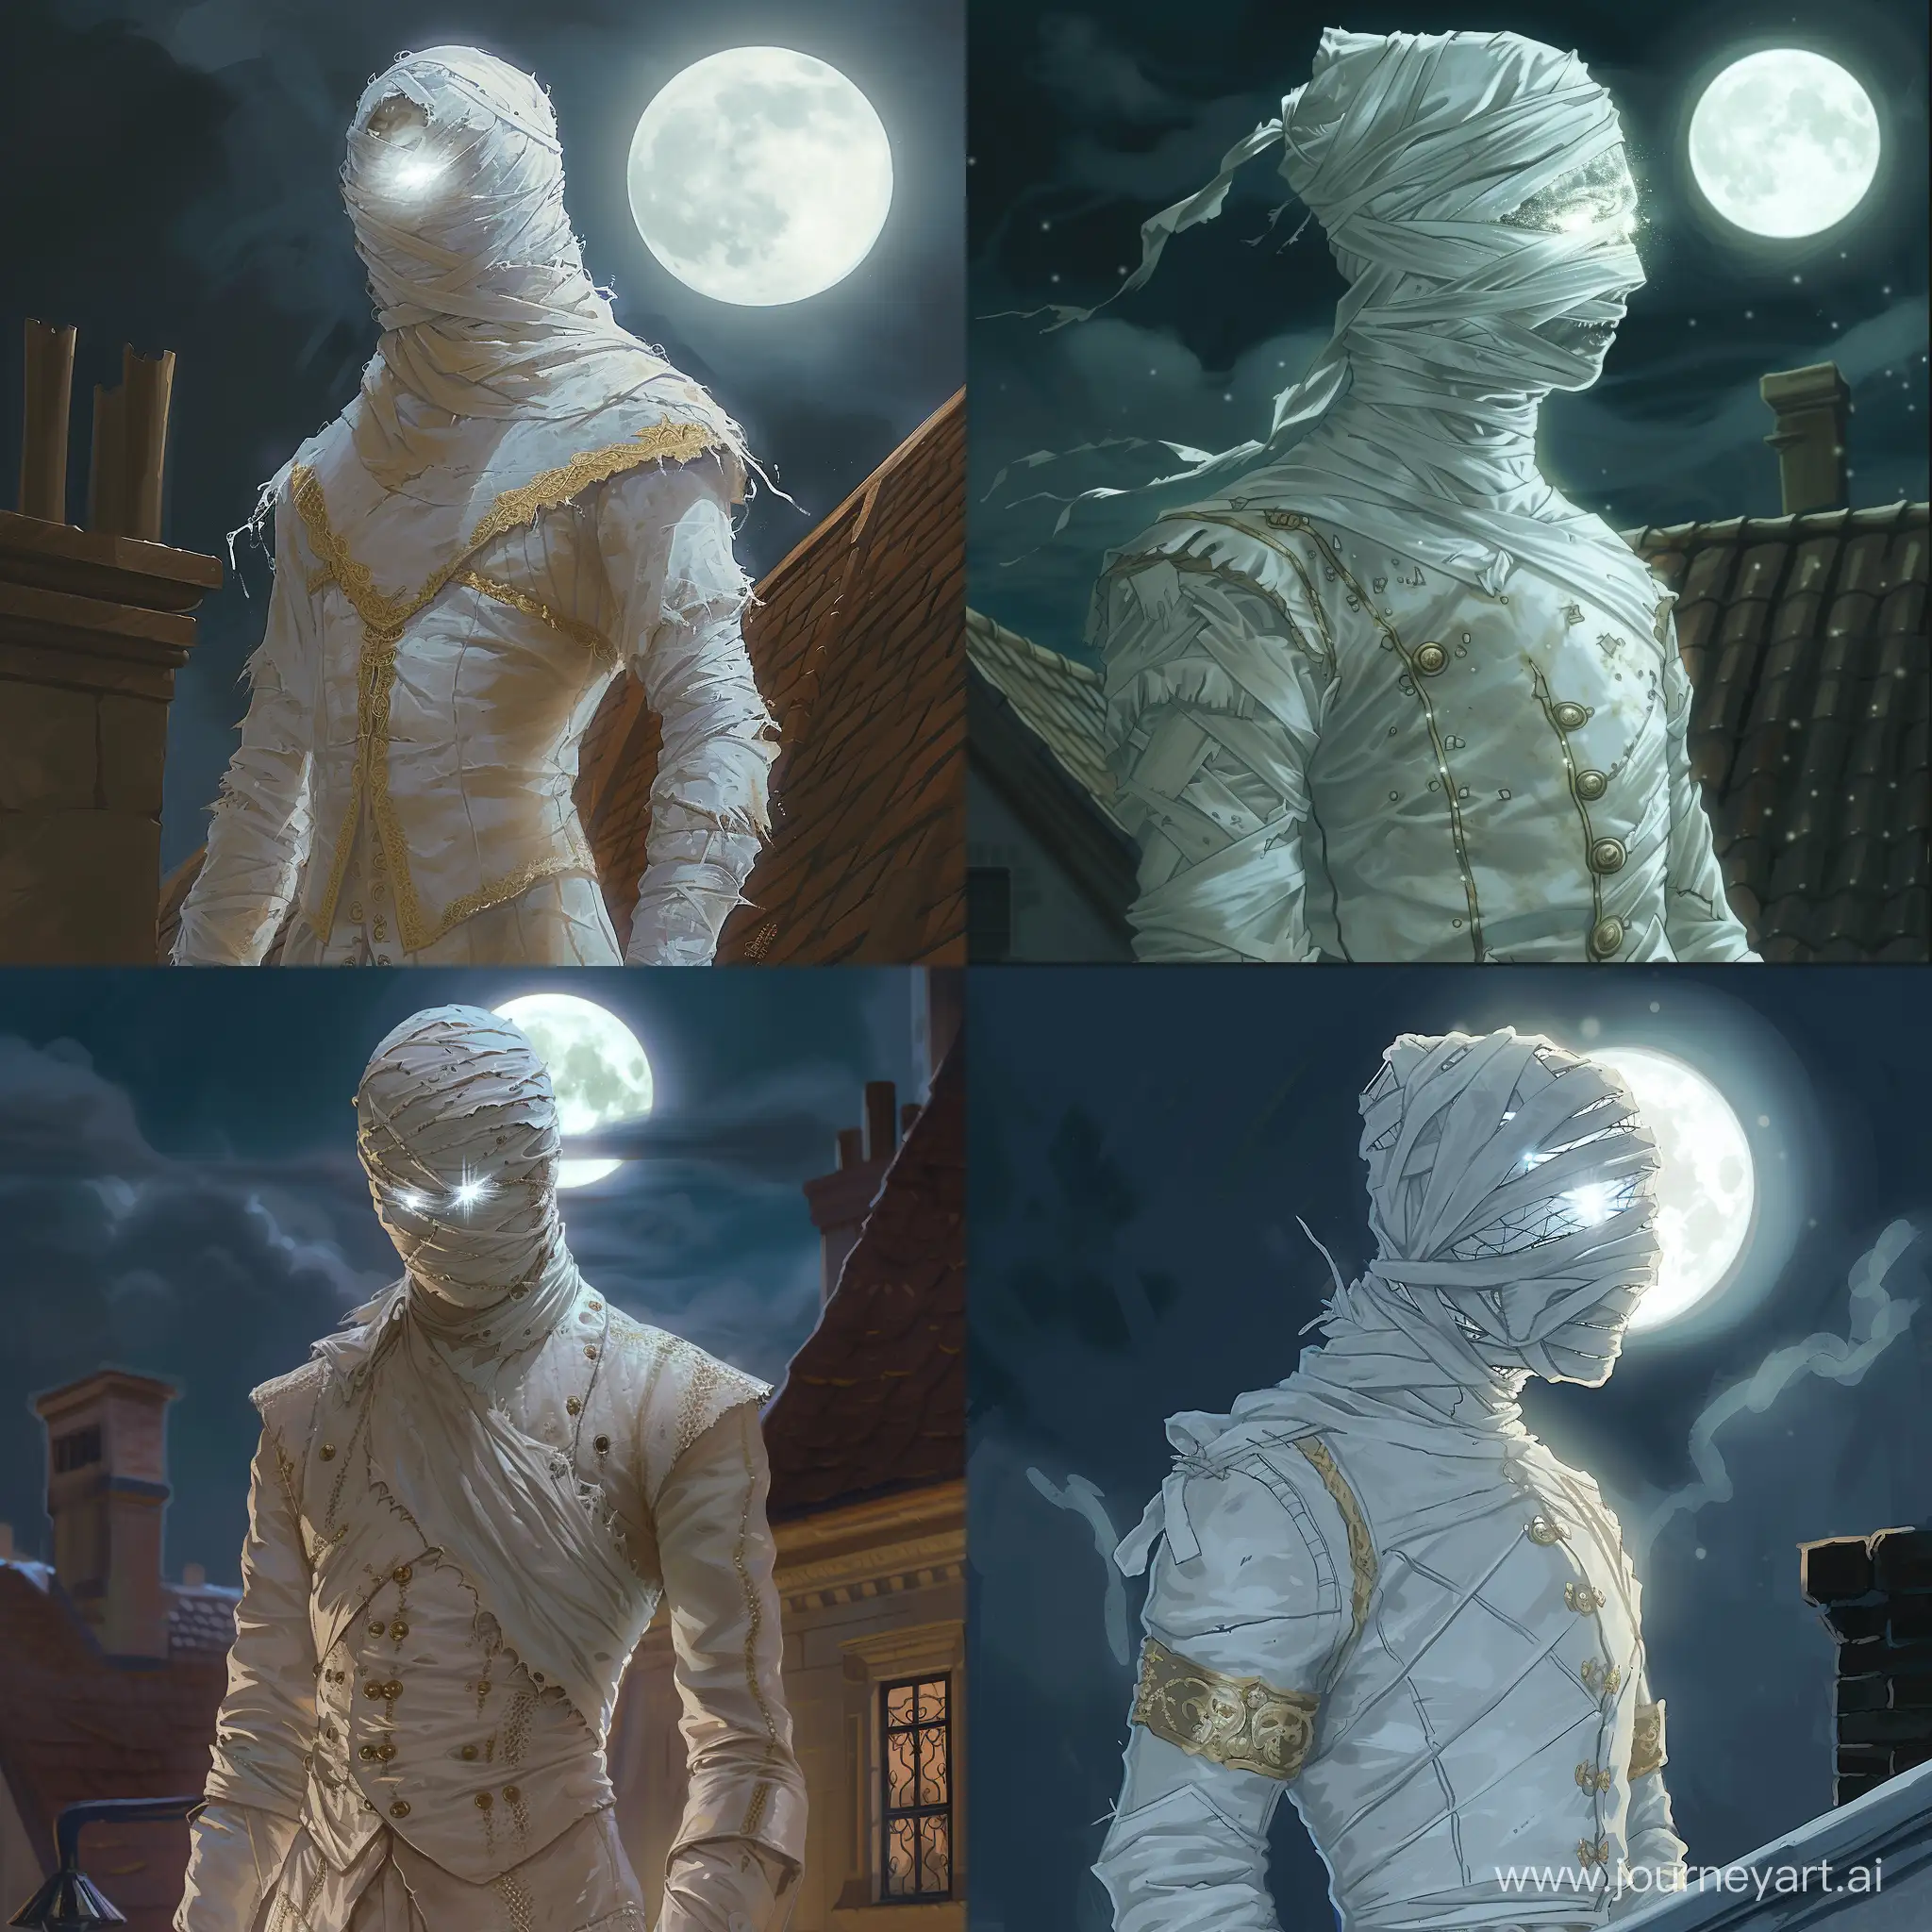 Draw a character from the Dungeons and Dragons universe according to the following description: He is a 30 years old male changeling dressed in white doublet sparingly ornated with pale gold. Head is fully covered with mummy-like bandages. No parts of the face are showing, except for his eyes shimmering with white light. He is watching from the rooftop, with a full moon on the background